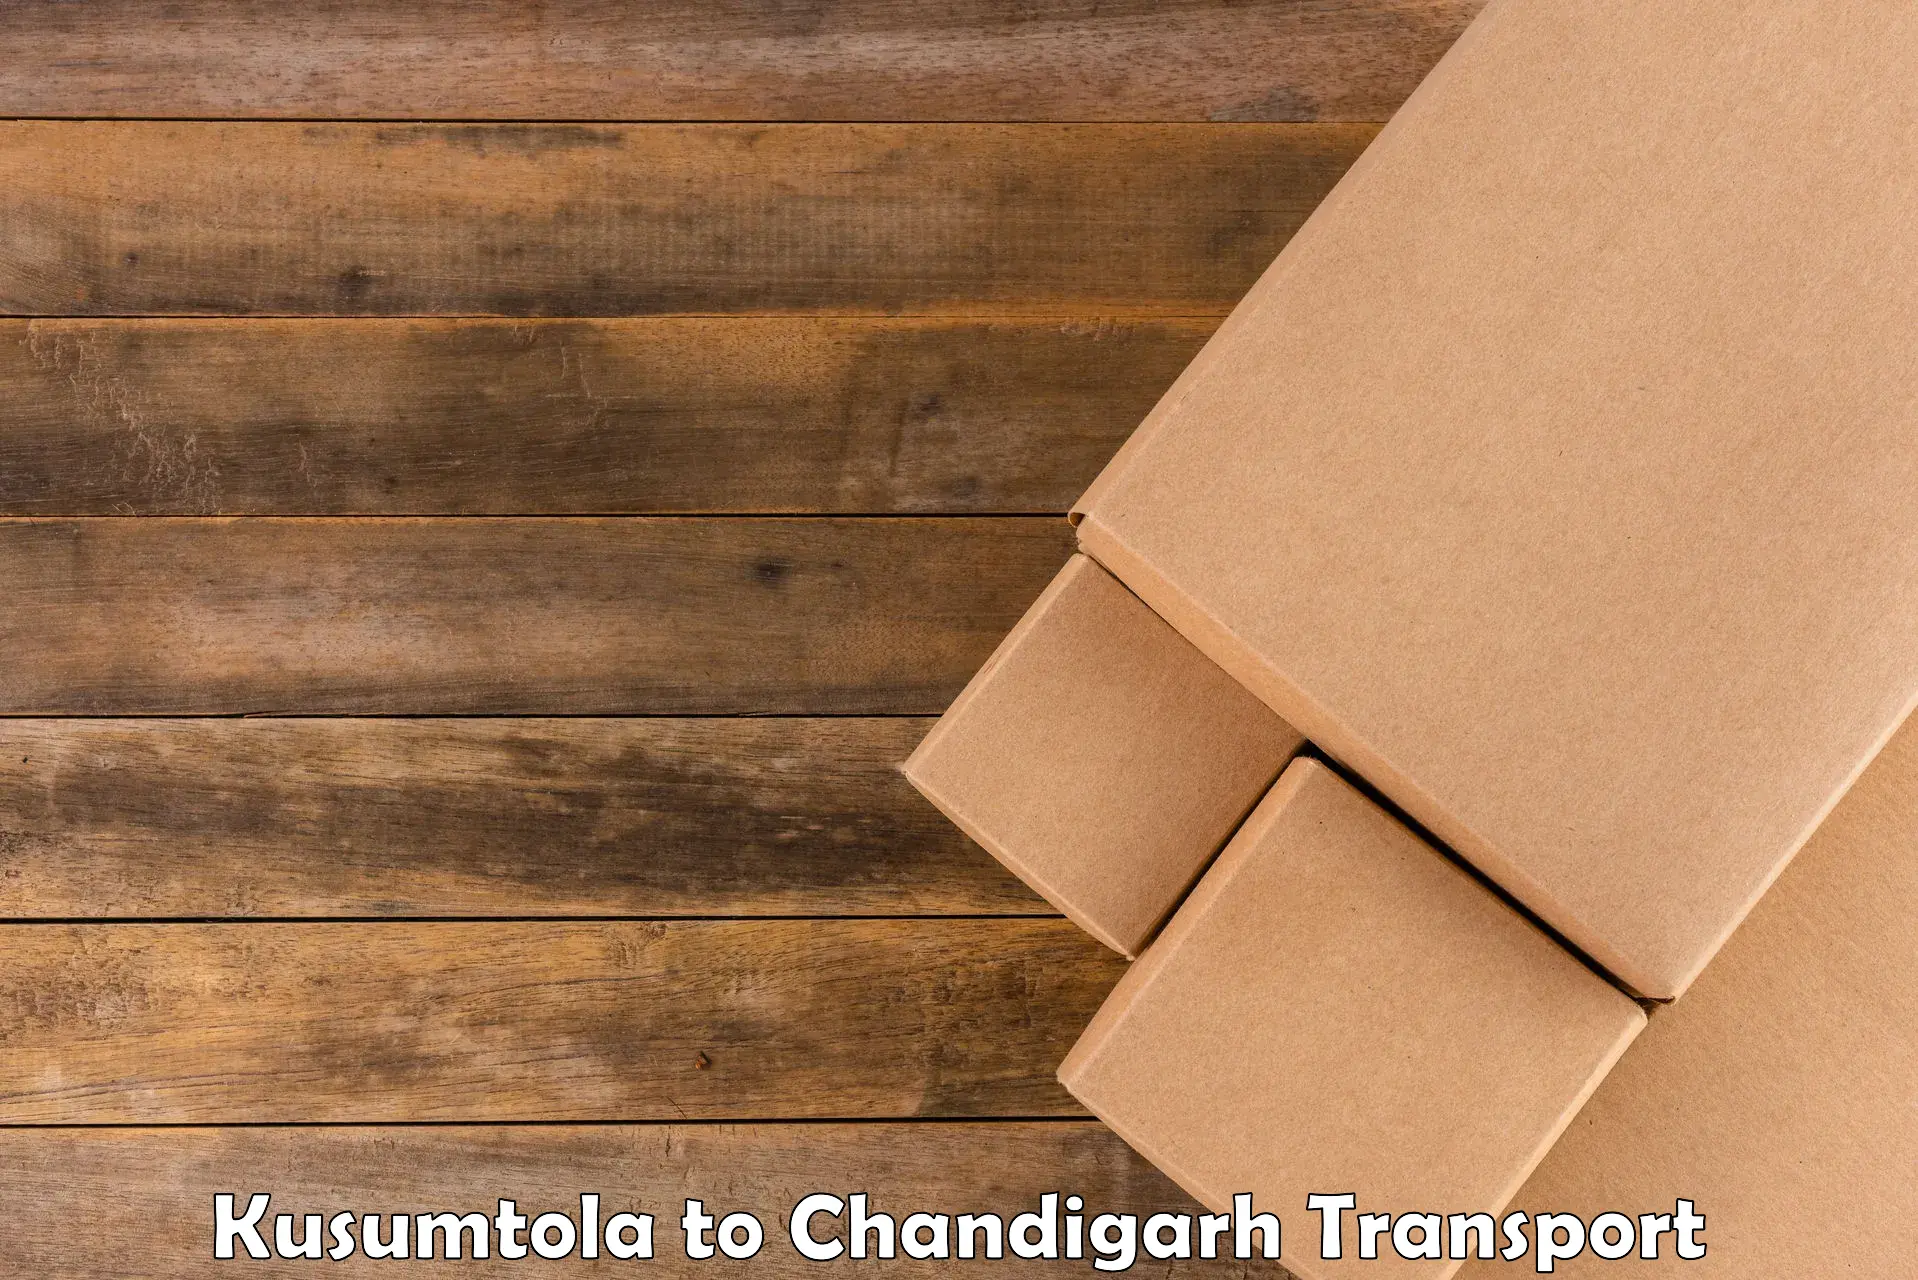 Truck transport companies in India in Kusumtola to Chandigarh